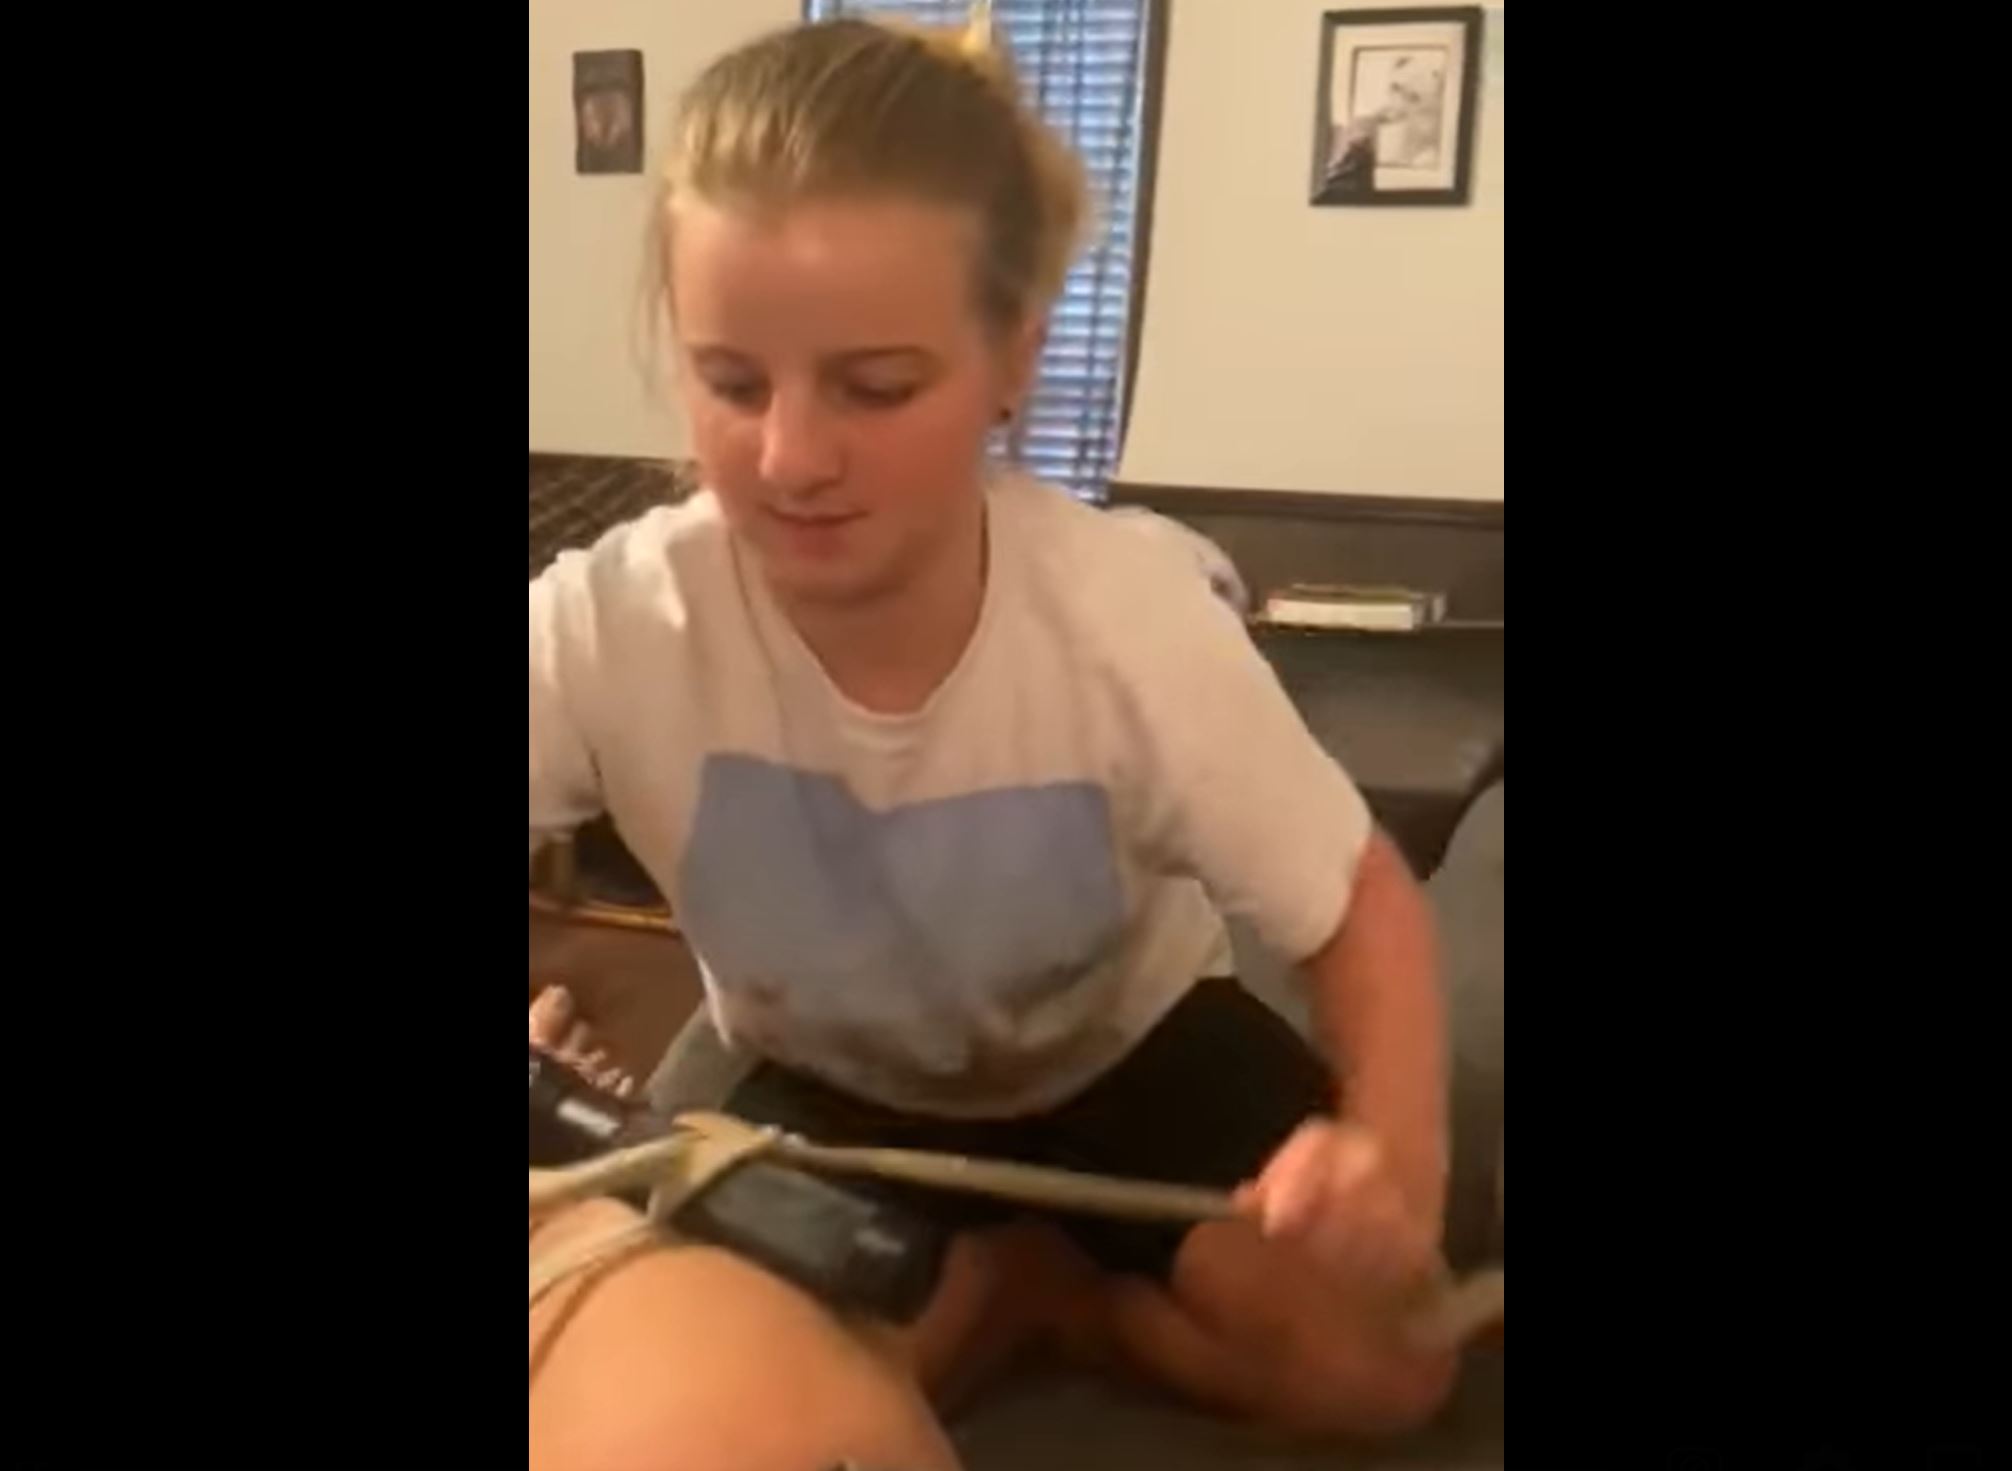 VIDEO: Springville officer's daughter demonstrates how to apply a tourniquet